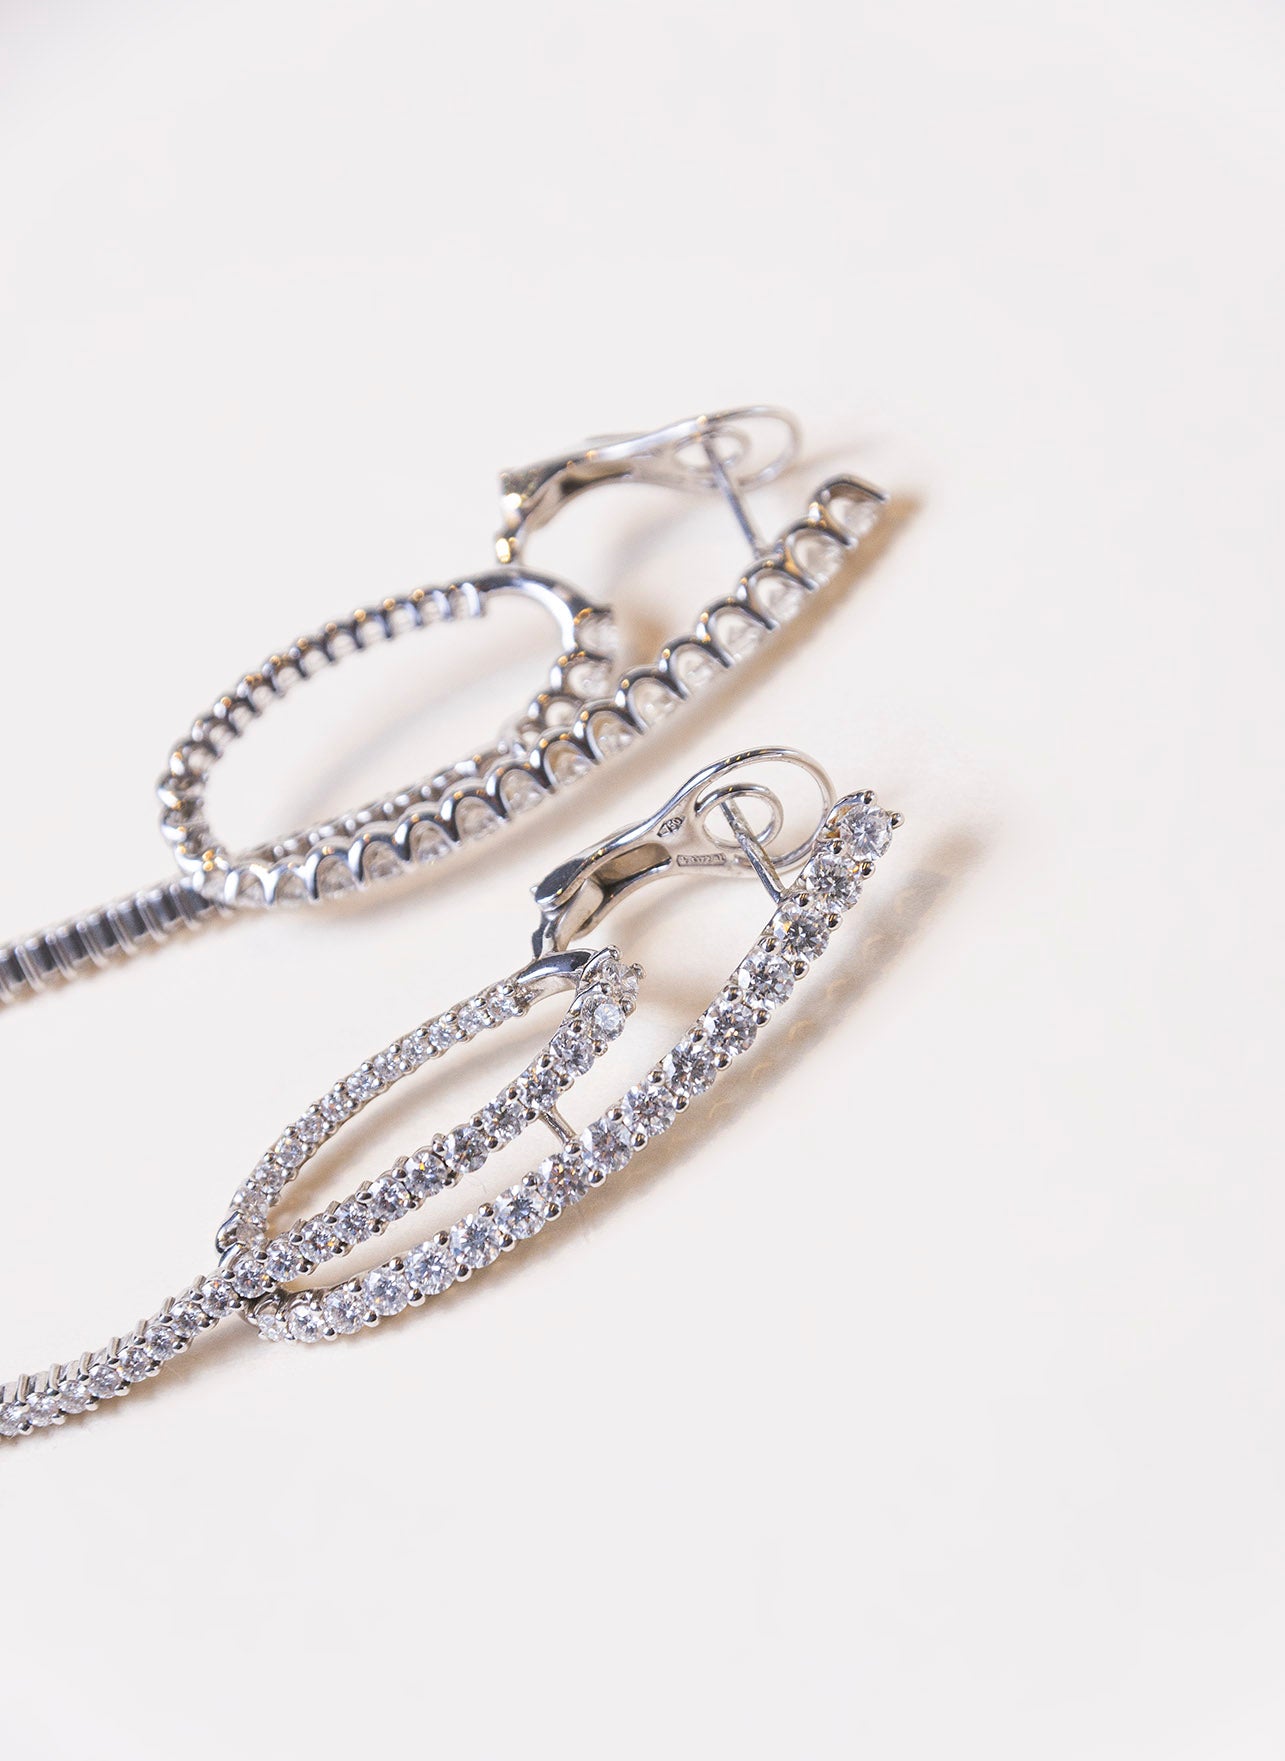 Large White Gold and Diamond Earrings